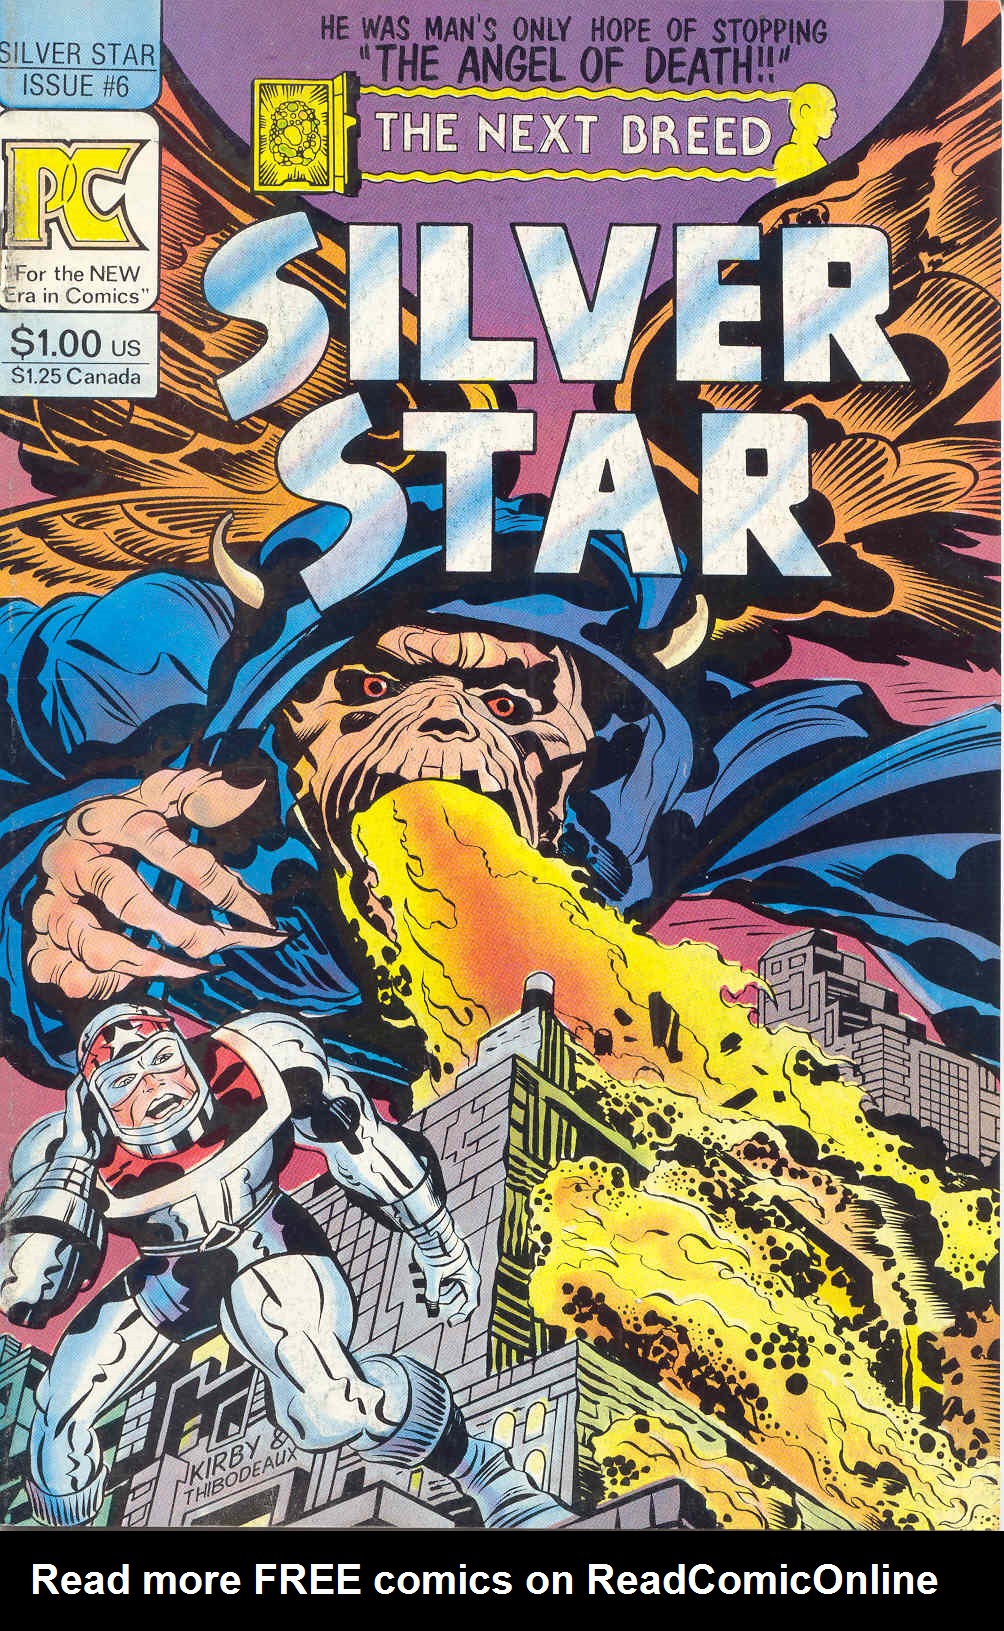 Read online Silver Star comic -  Issue #6 - 1